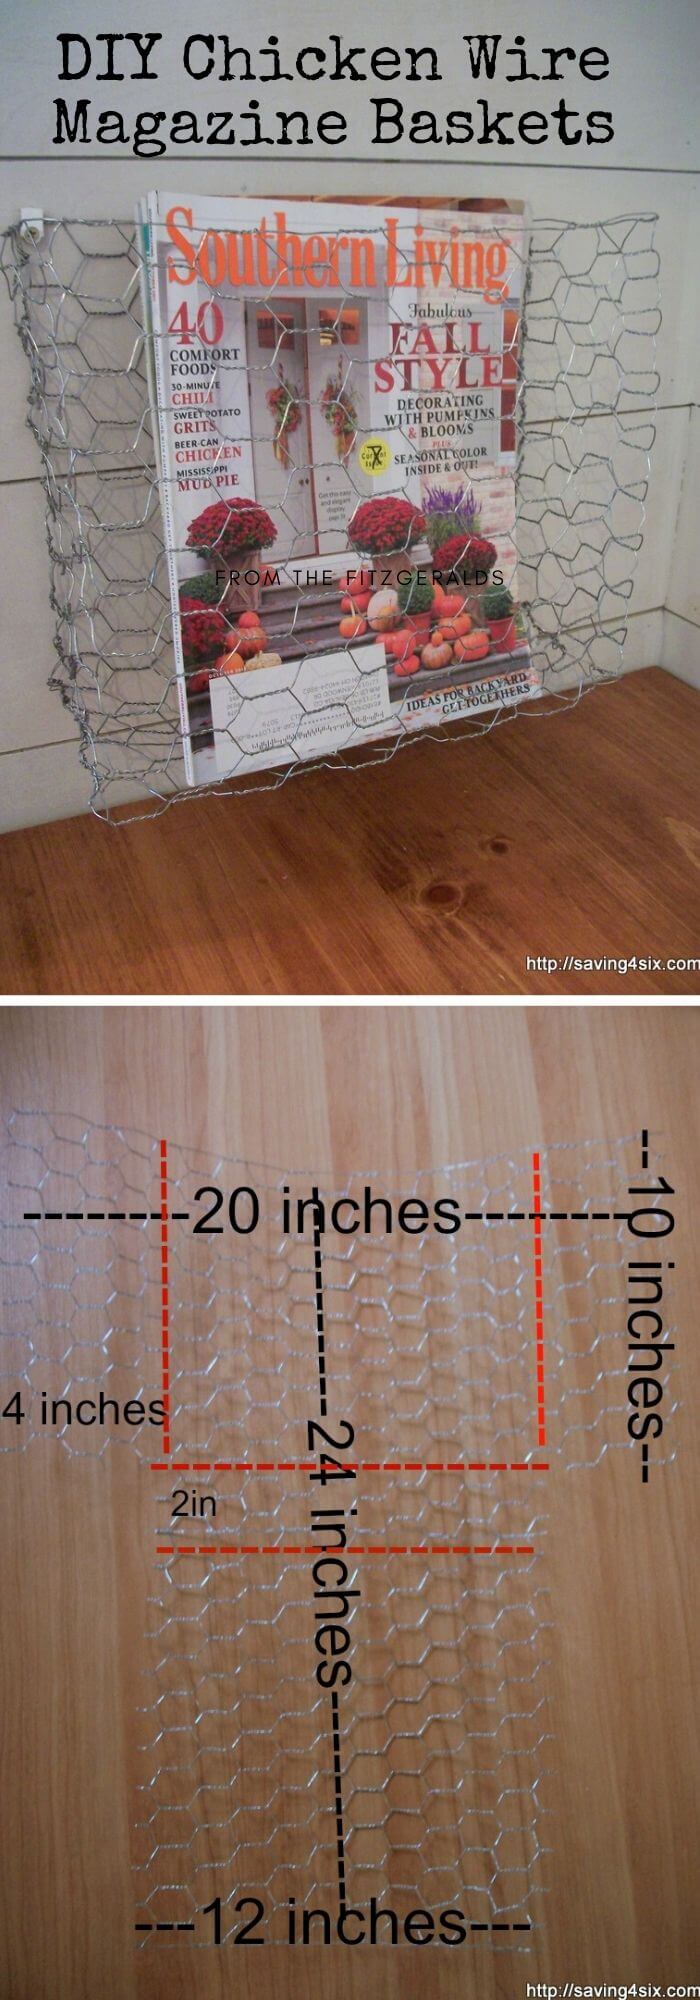 6 chicken wire projects